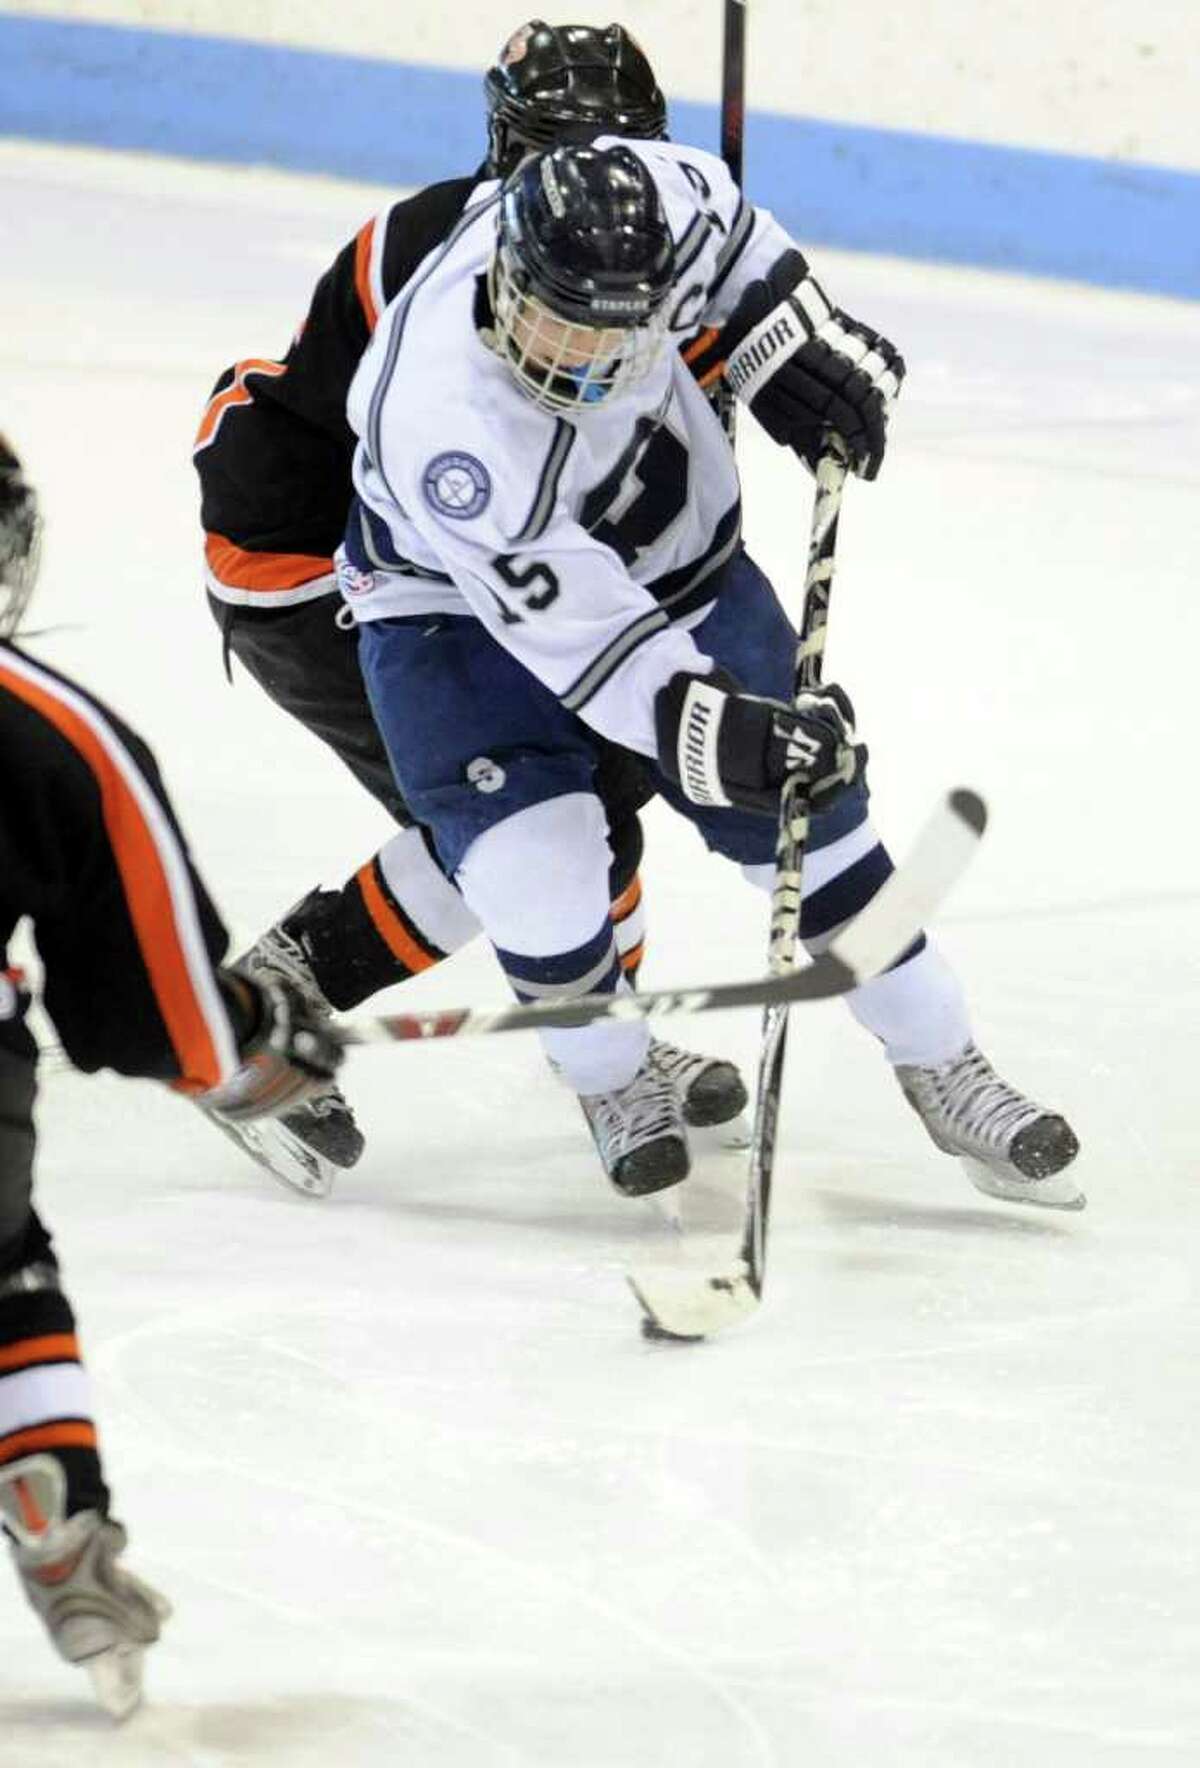 Watertown-Pomperaug takes on Staples-Weston-Shelton in the Division III state playoff game at Yale University's Ingalls Rink Saturday, Mar. 19, 2011.